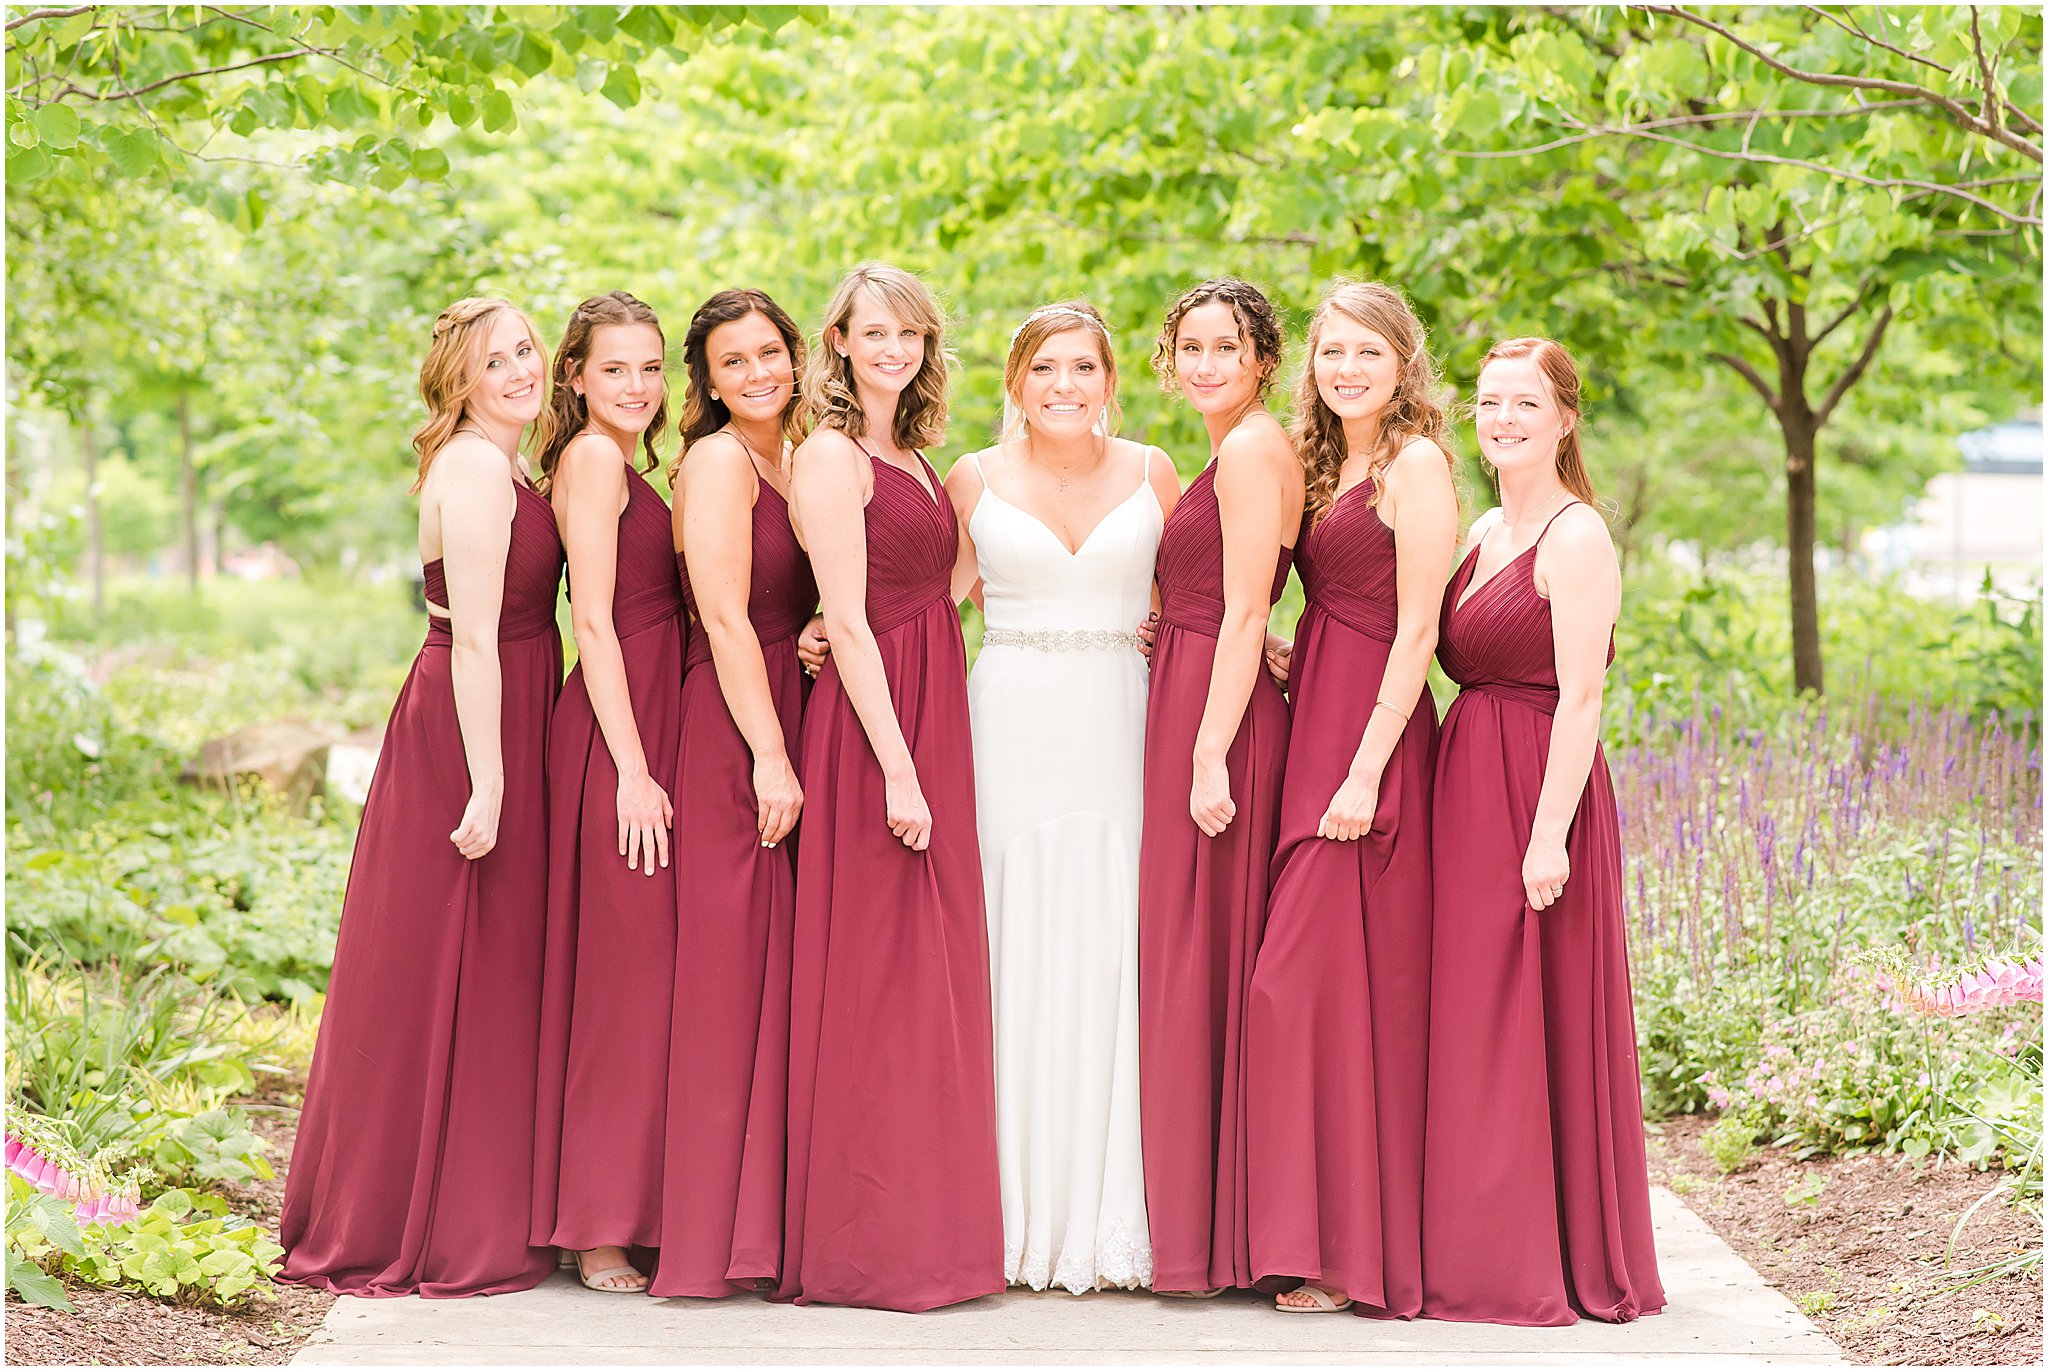 Bride in white wedding gown and bridesmaids in wine red dresses smiling at the camera during a wedding at The Phoenix Cincinnati